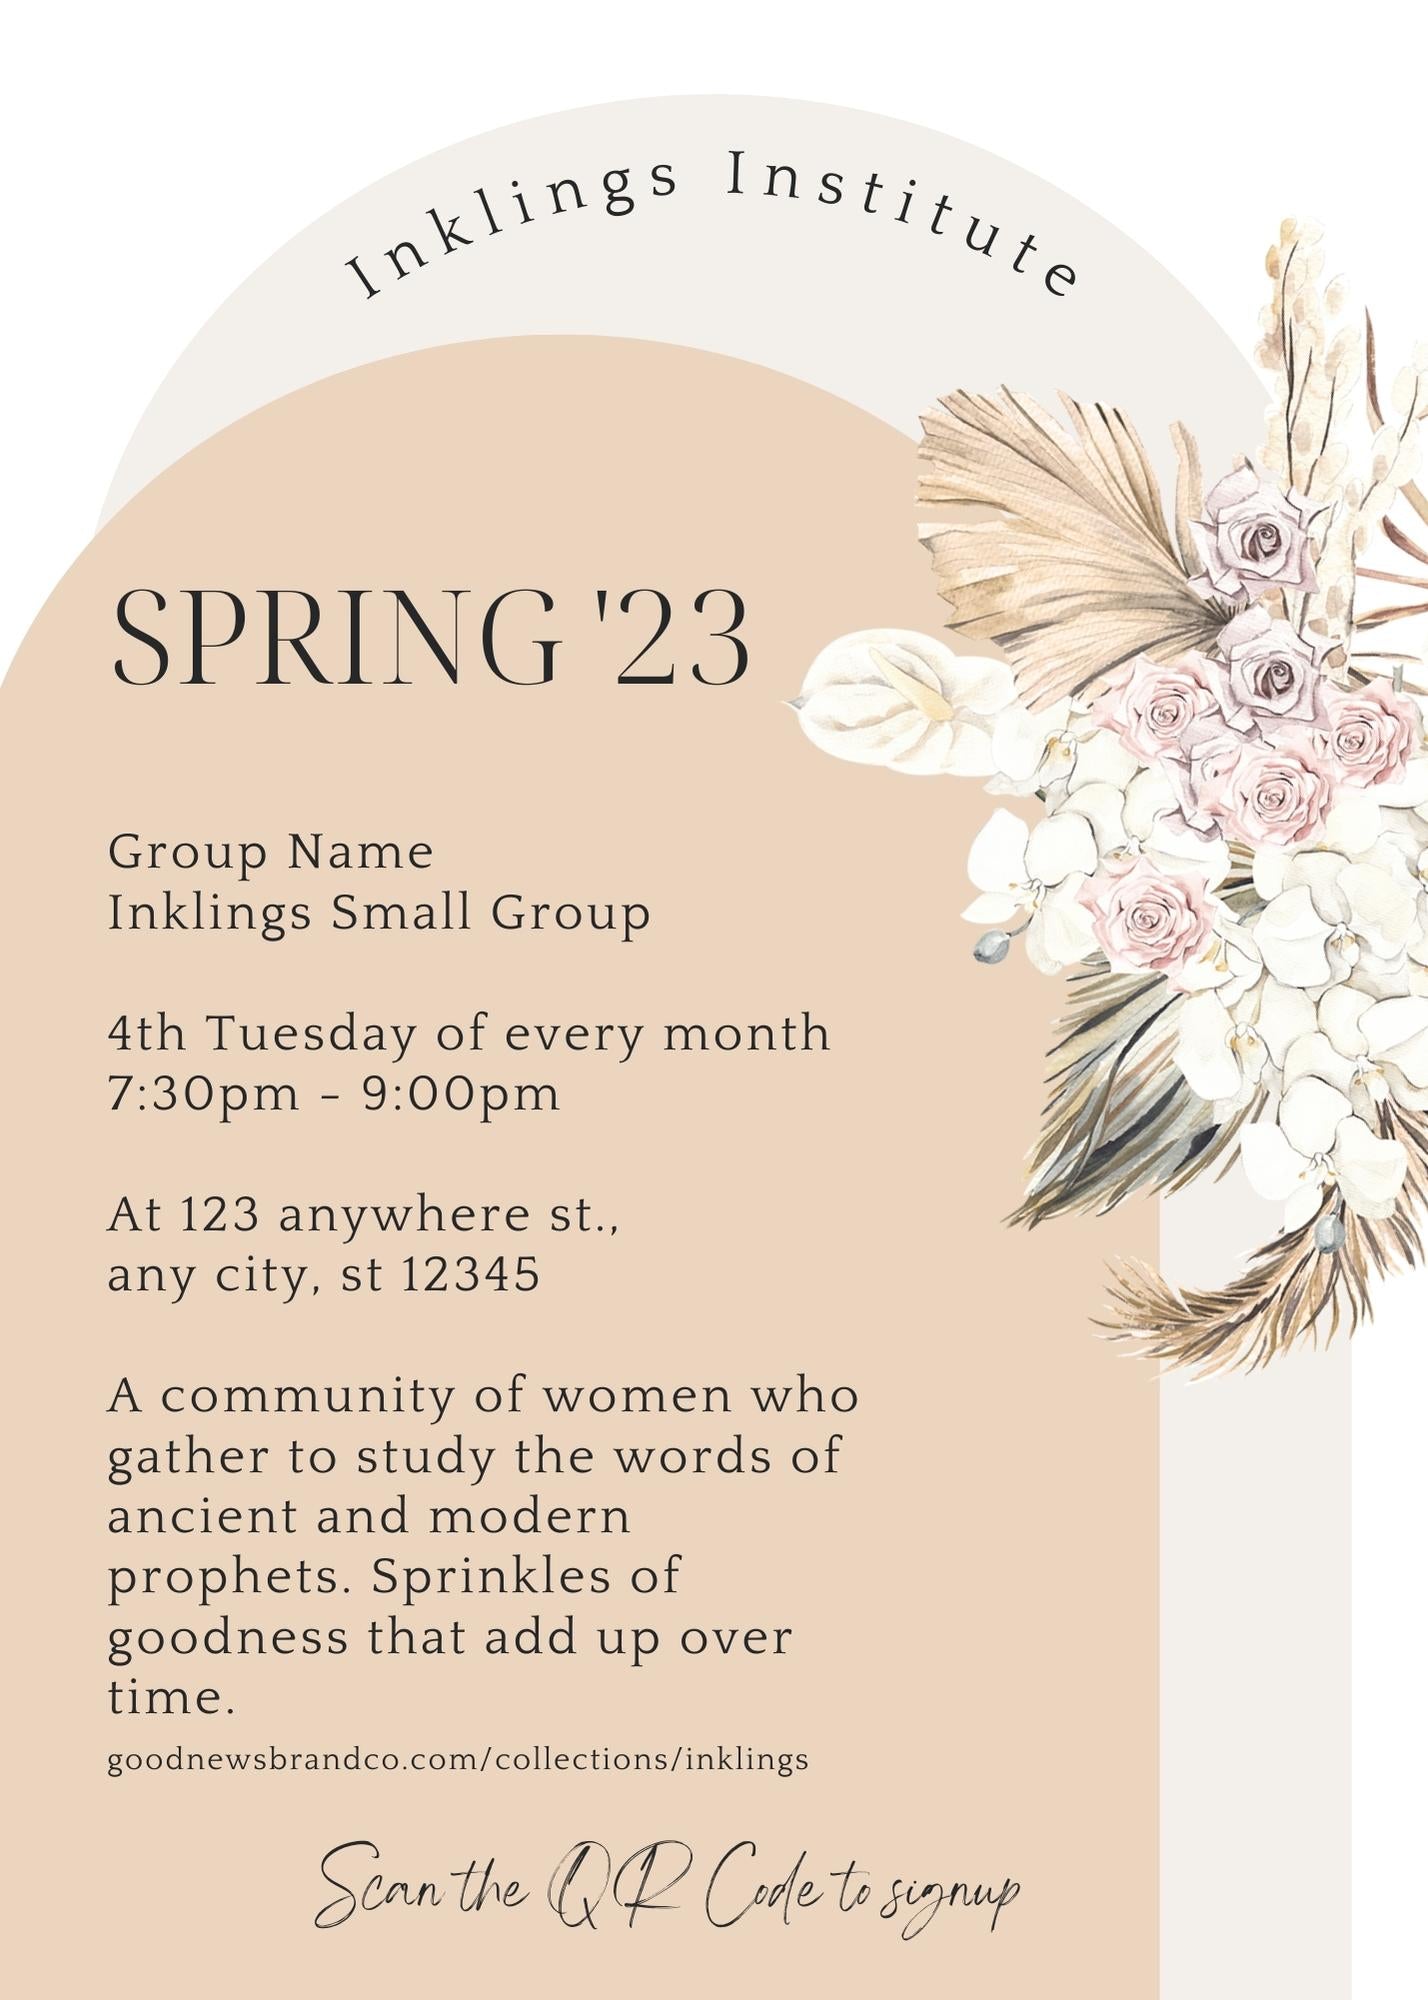 Inklings Small Group - Spring '23 Invite Template